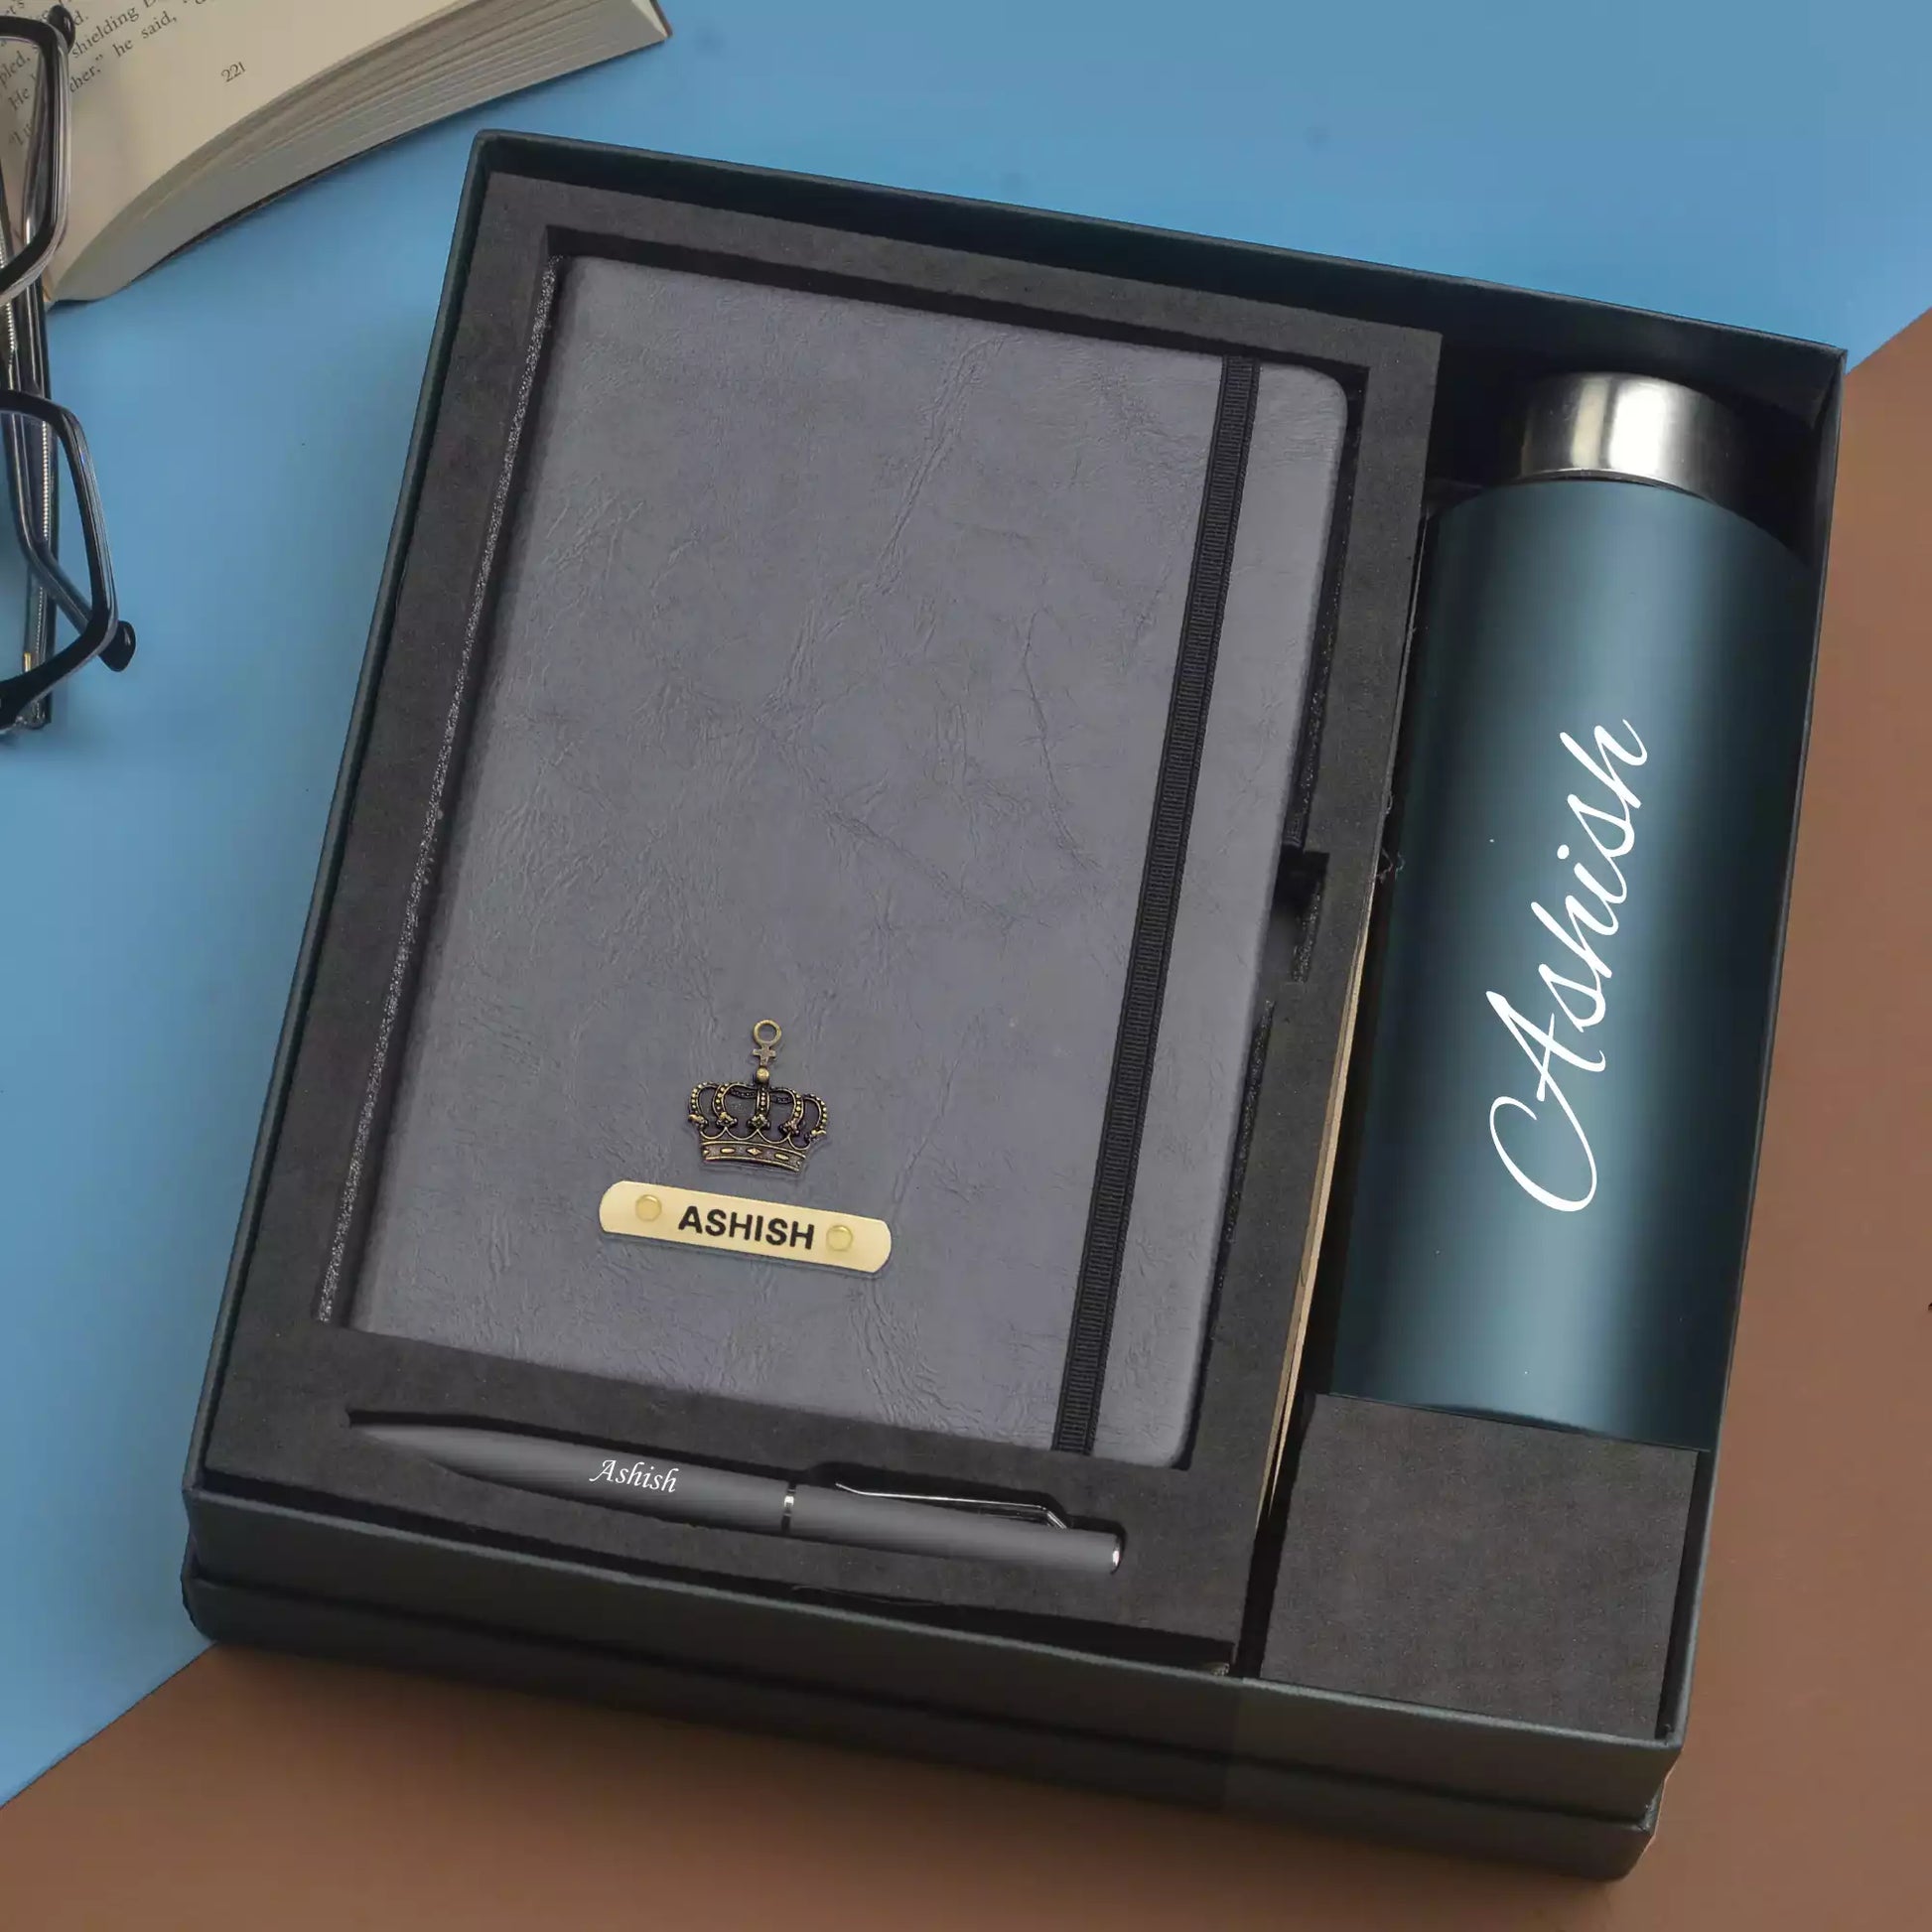 Keep your daily tasks organized and your thirst quenched with our Classy Hardcover Diary, Classic Metal Pen, and Classic Smart Bottle 900 ml. The diary's hardcover design, paired with the pen and bottle's classic styles, make for the perfect trio of sophistication and convenience.